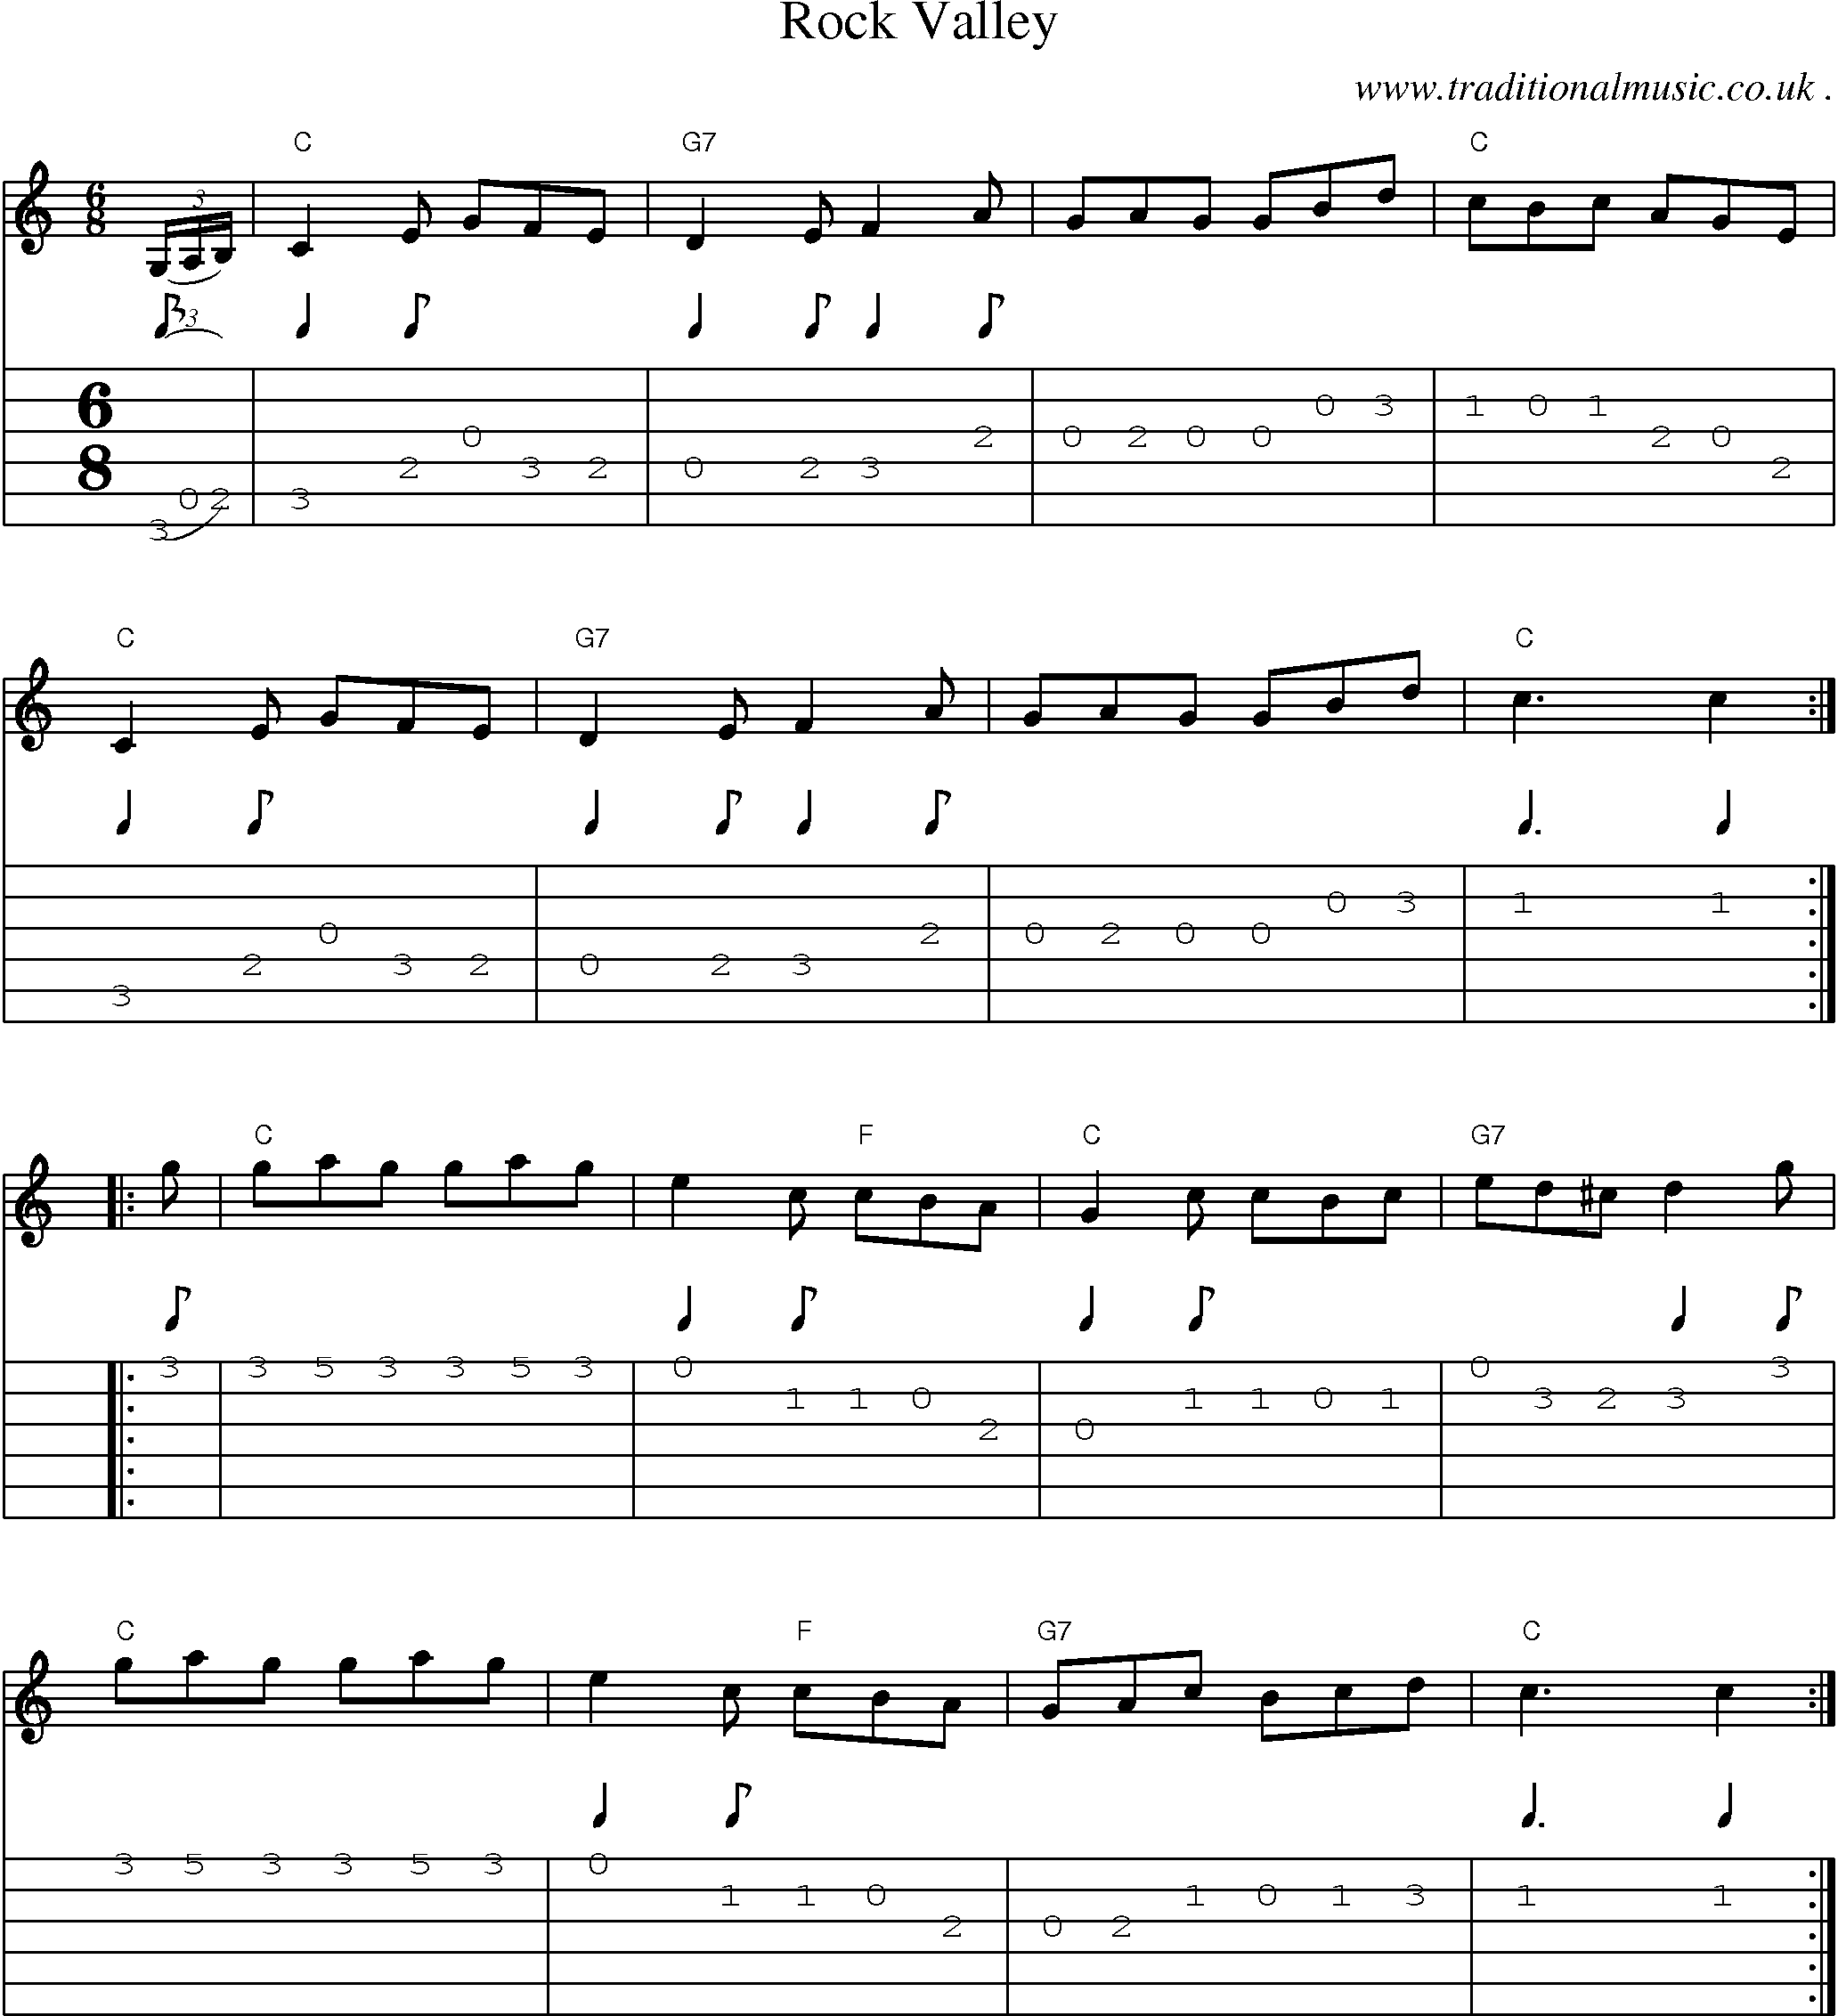 Music Score and Guitar Tabs for Rock Valley